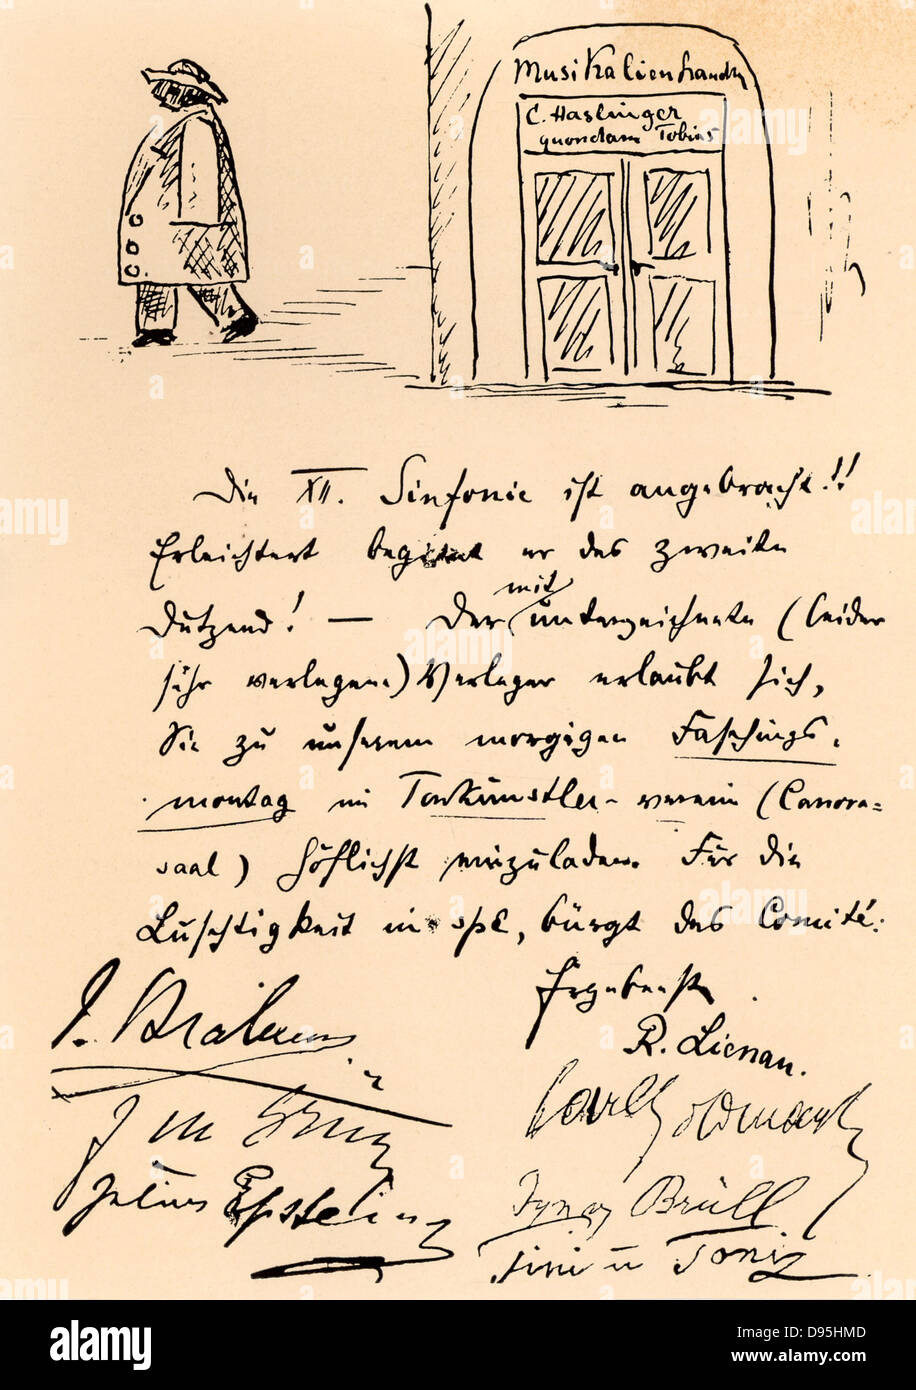 Invitation to a carnival at the Tonkunstlerverein, Vienna. Cartoon shows Anton Bruckner (1824-1896) leaving the office of Haslinger, Beethoven's publisher: 'The twelfth symphony has been worked off!! Relieved, he starts the second dozen'.   Signed by Johnnes Brahms, J.M. Grun, Julius Epstein, R. Lienau, Carl Goldmark, Brull, and Mr & Mrs Anton Door. Stock Photo